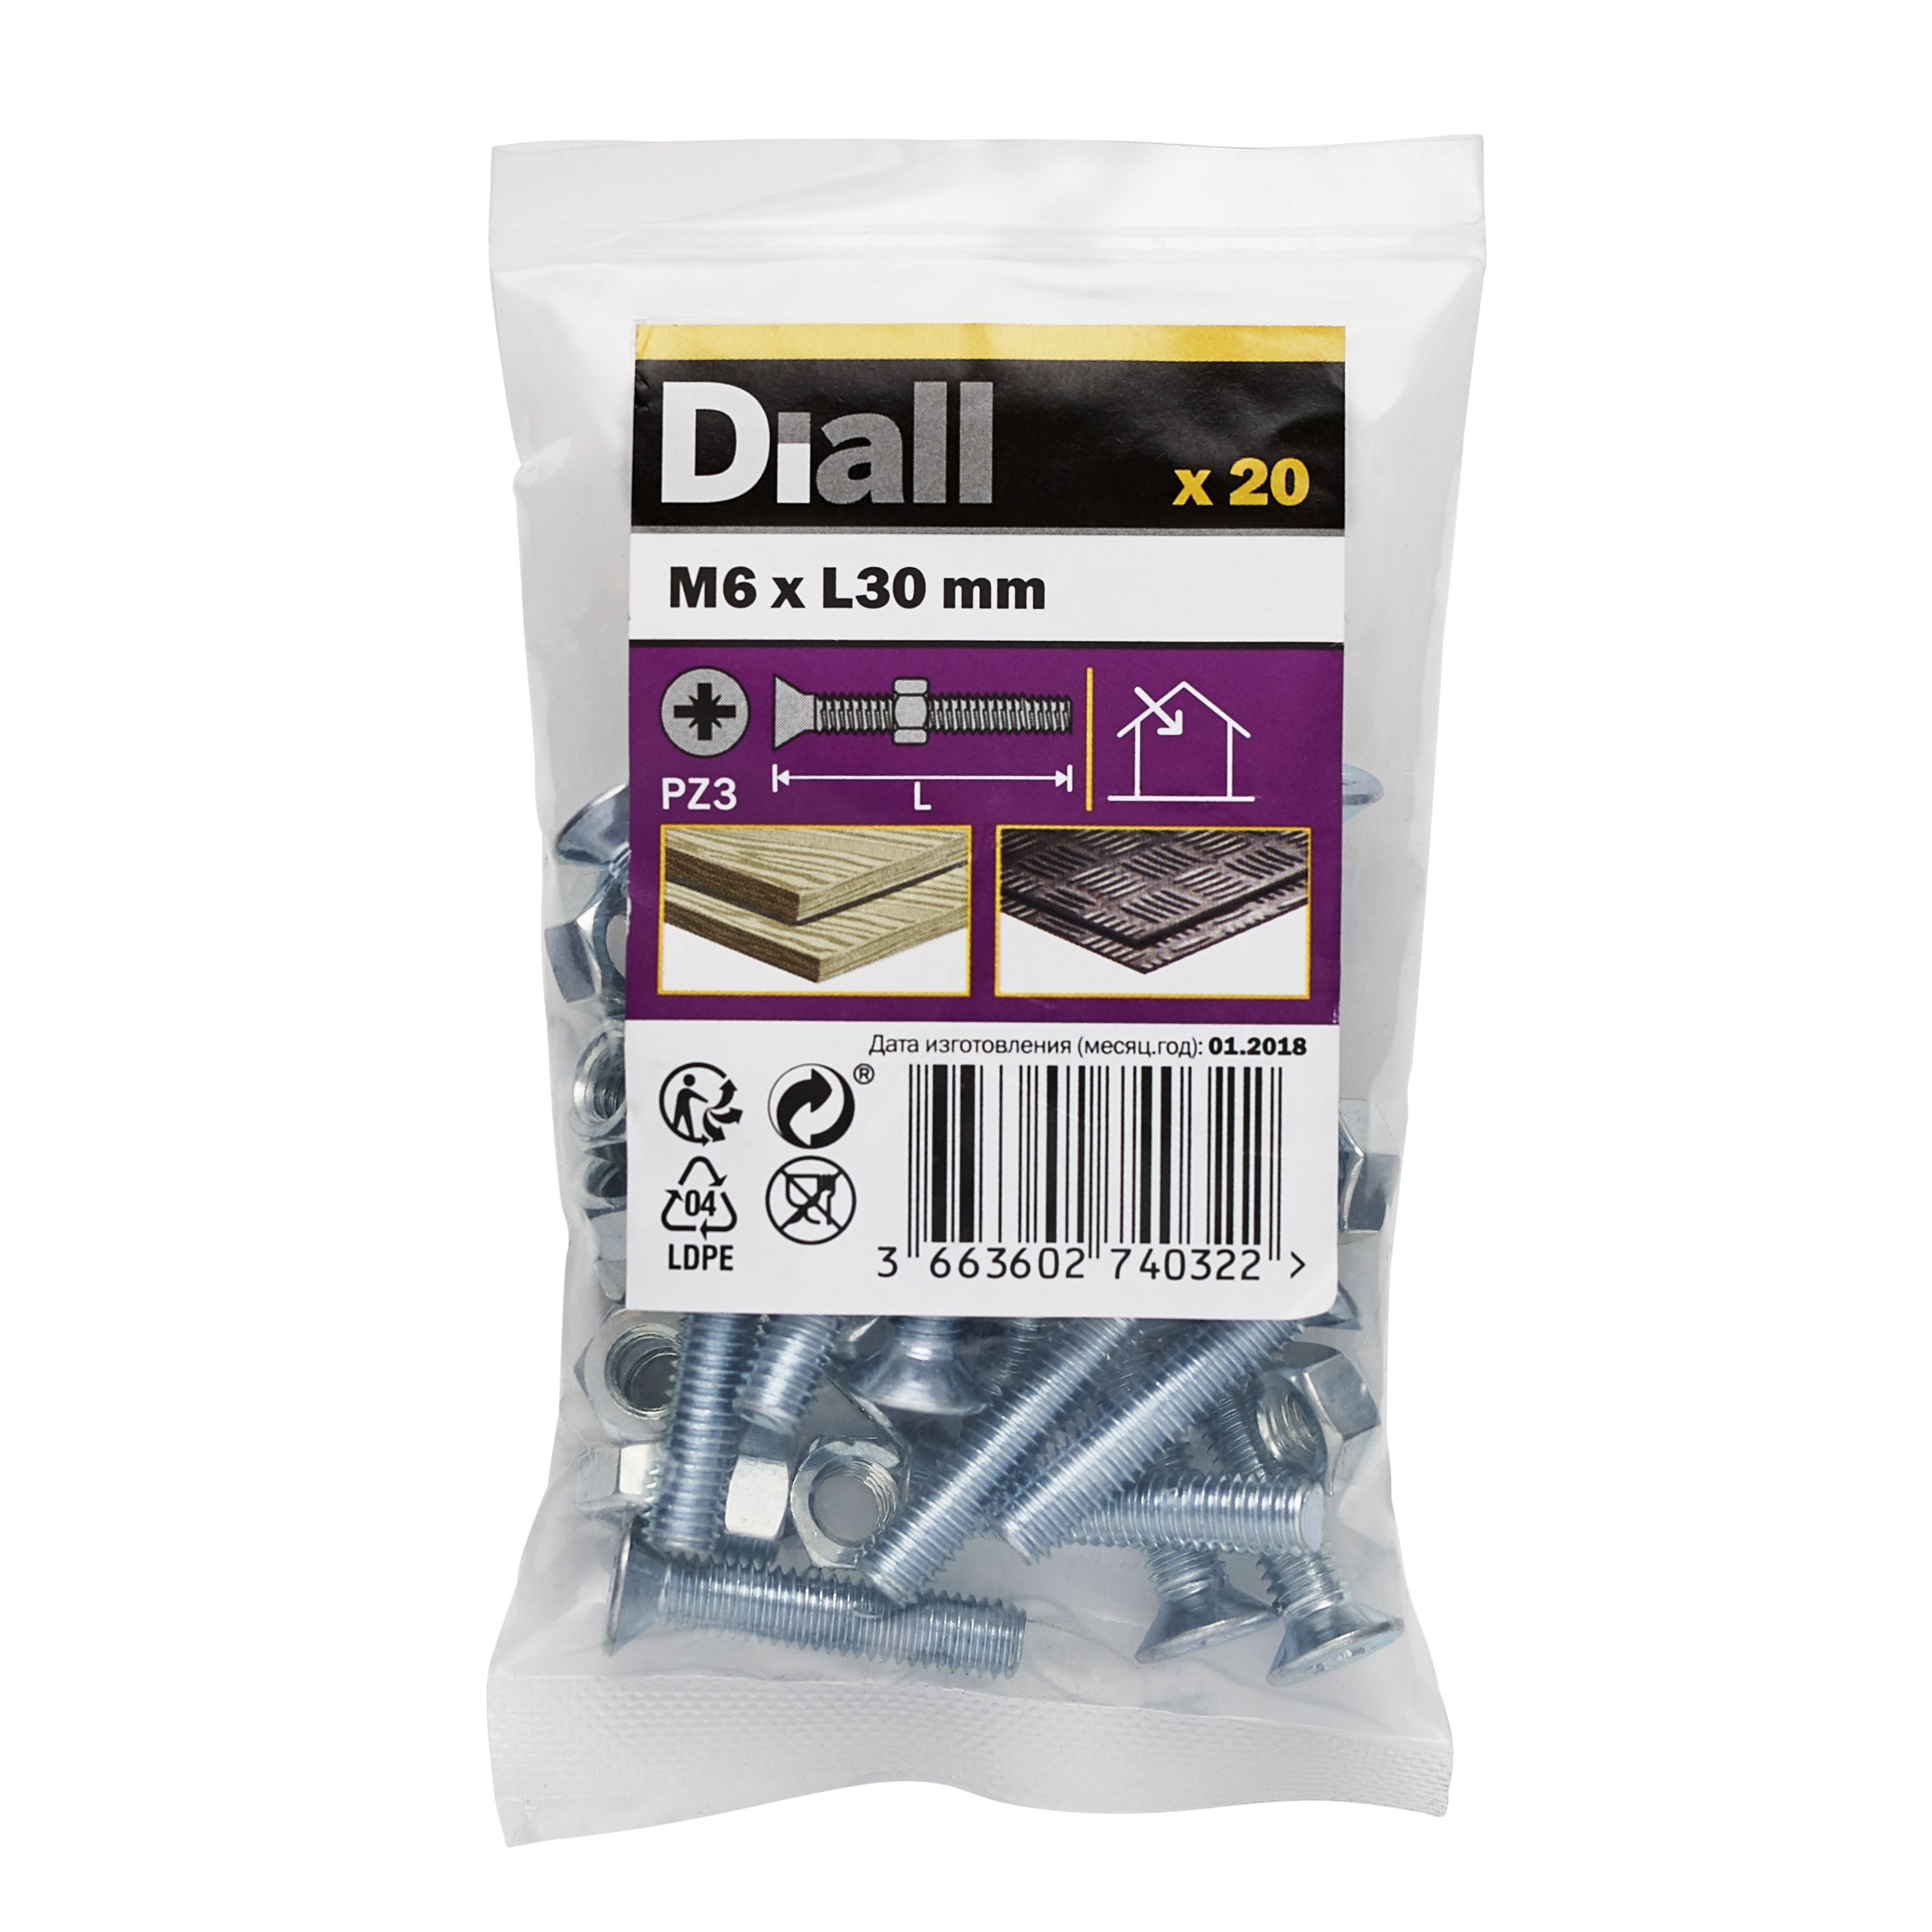 Diall M6 Cruciform Philips Pan head Zinc-plated Carbon steel Machine screw & nut (Dia)6mm (L)30mm, Pack of 20